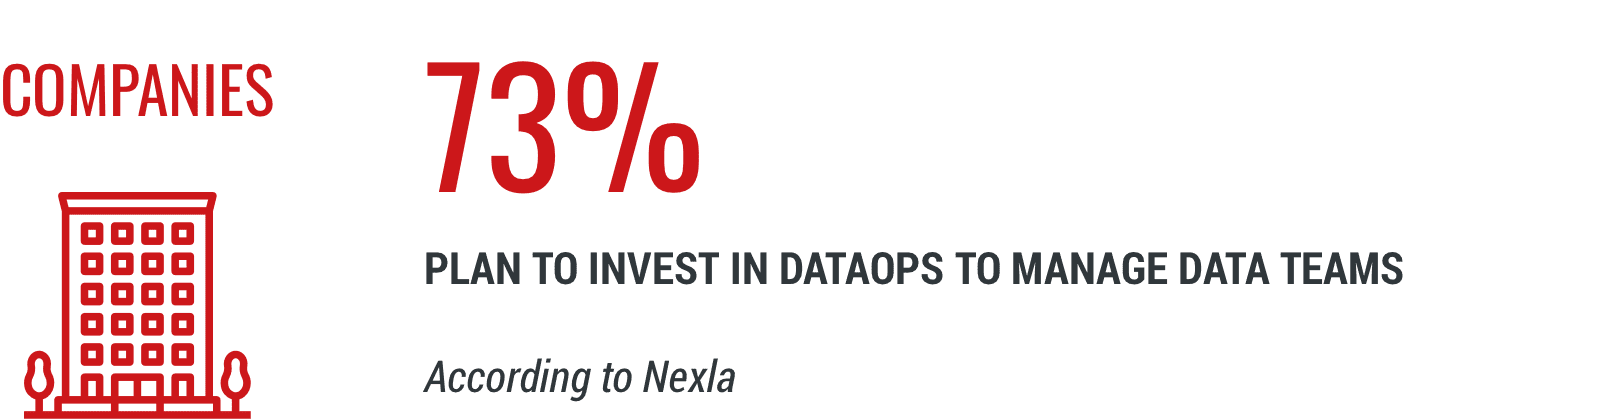 Companies plan to invest in DataOps